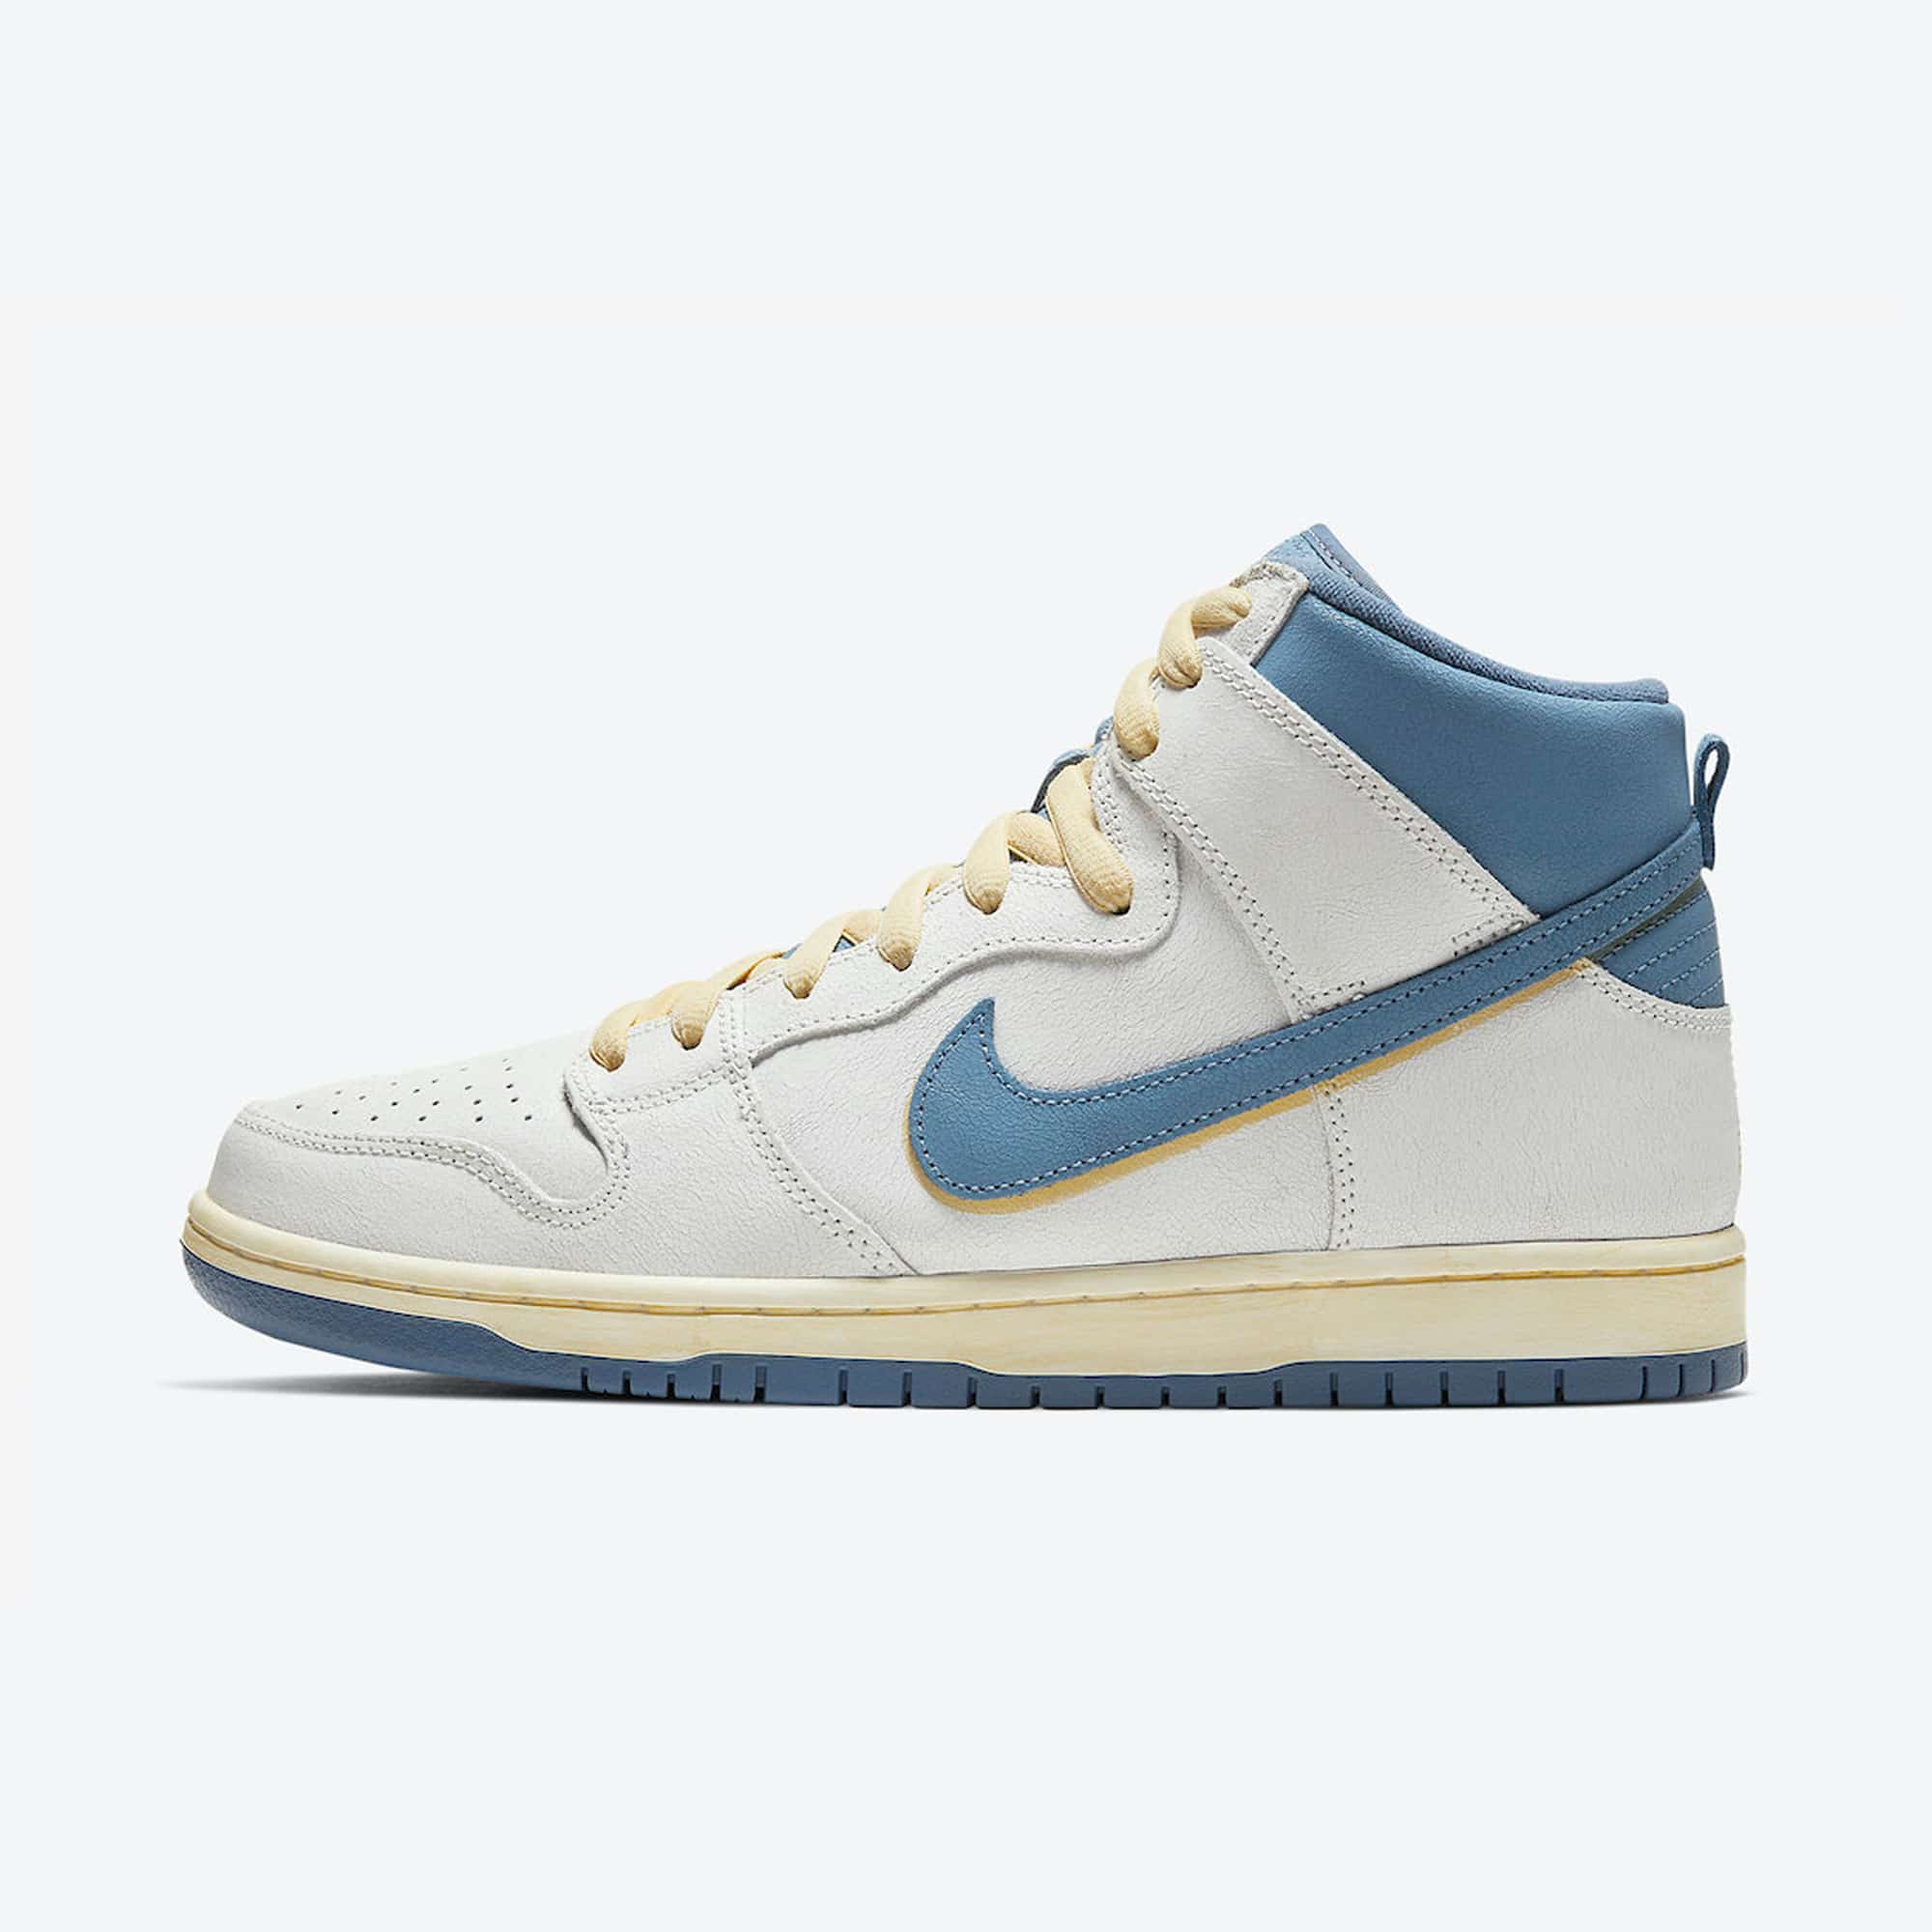 How to Cop Atlas Nike SB Dunk High Lost At Sea CZ3334-100 Releases